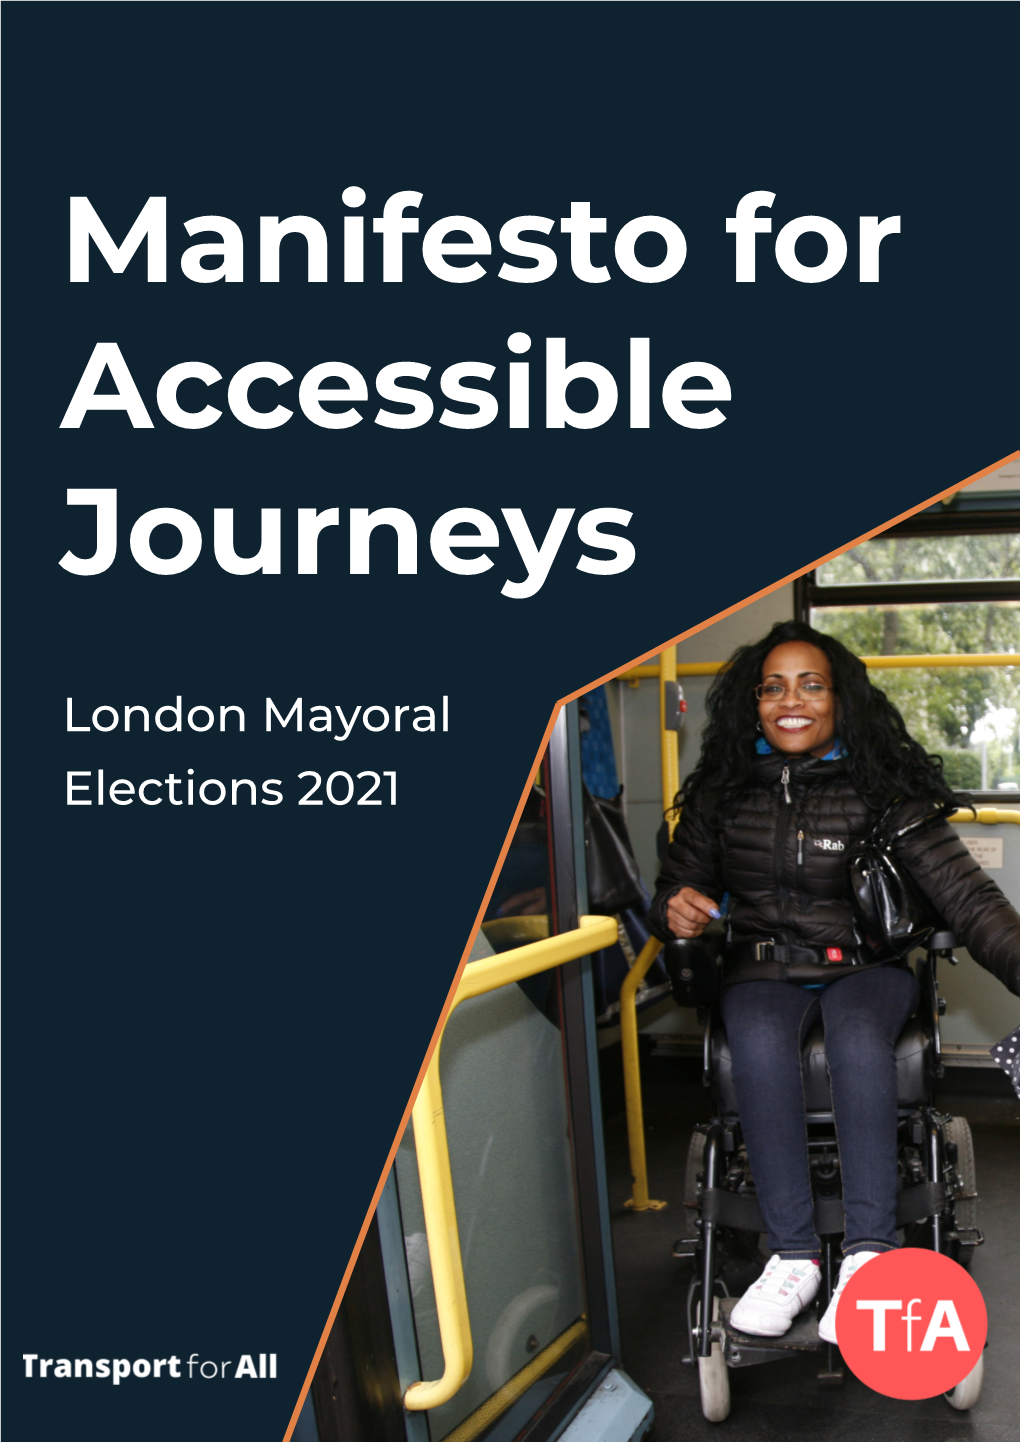 London Mayoral Elections 2021 Introduction